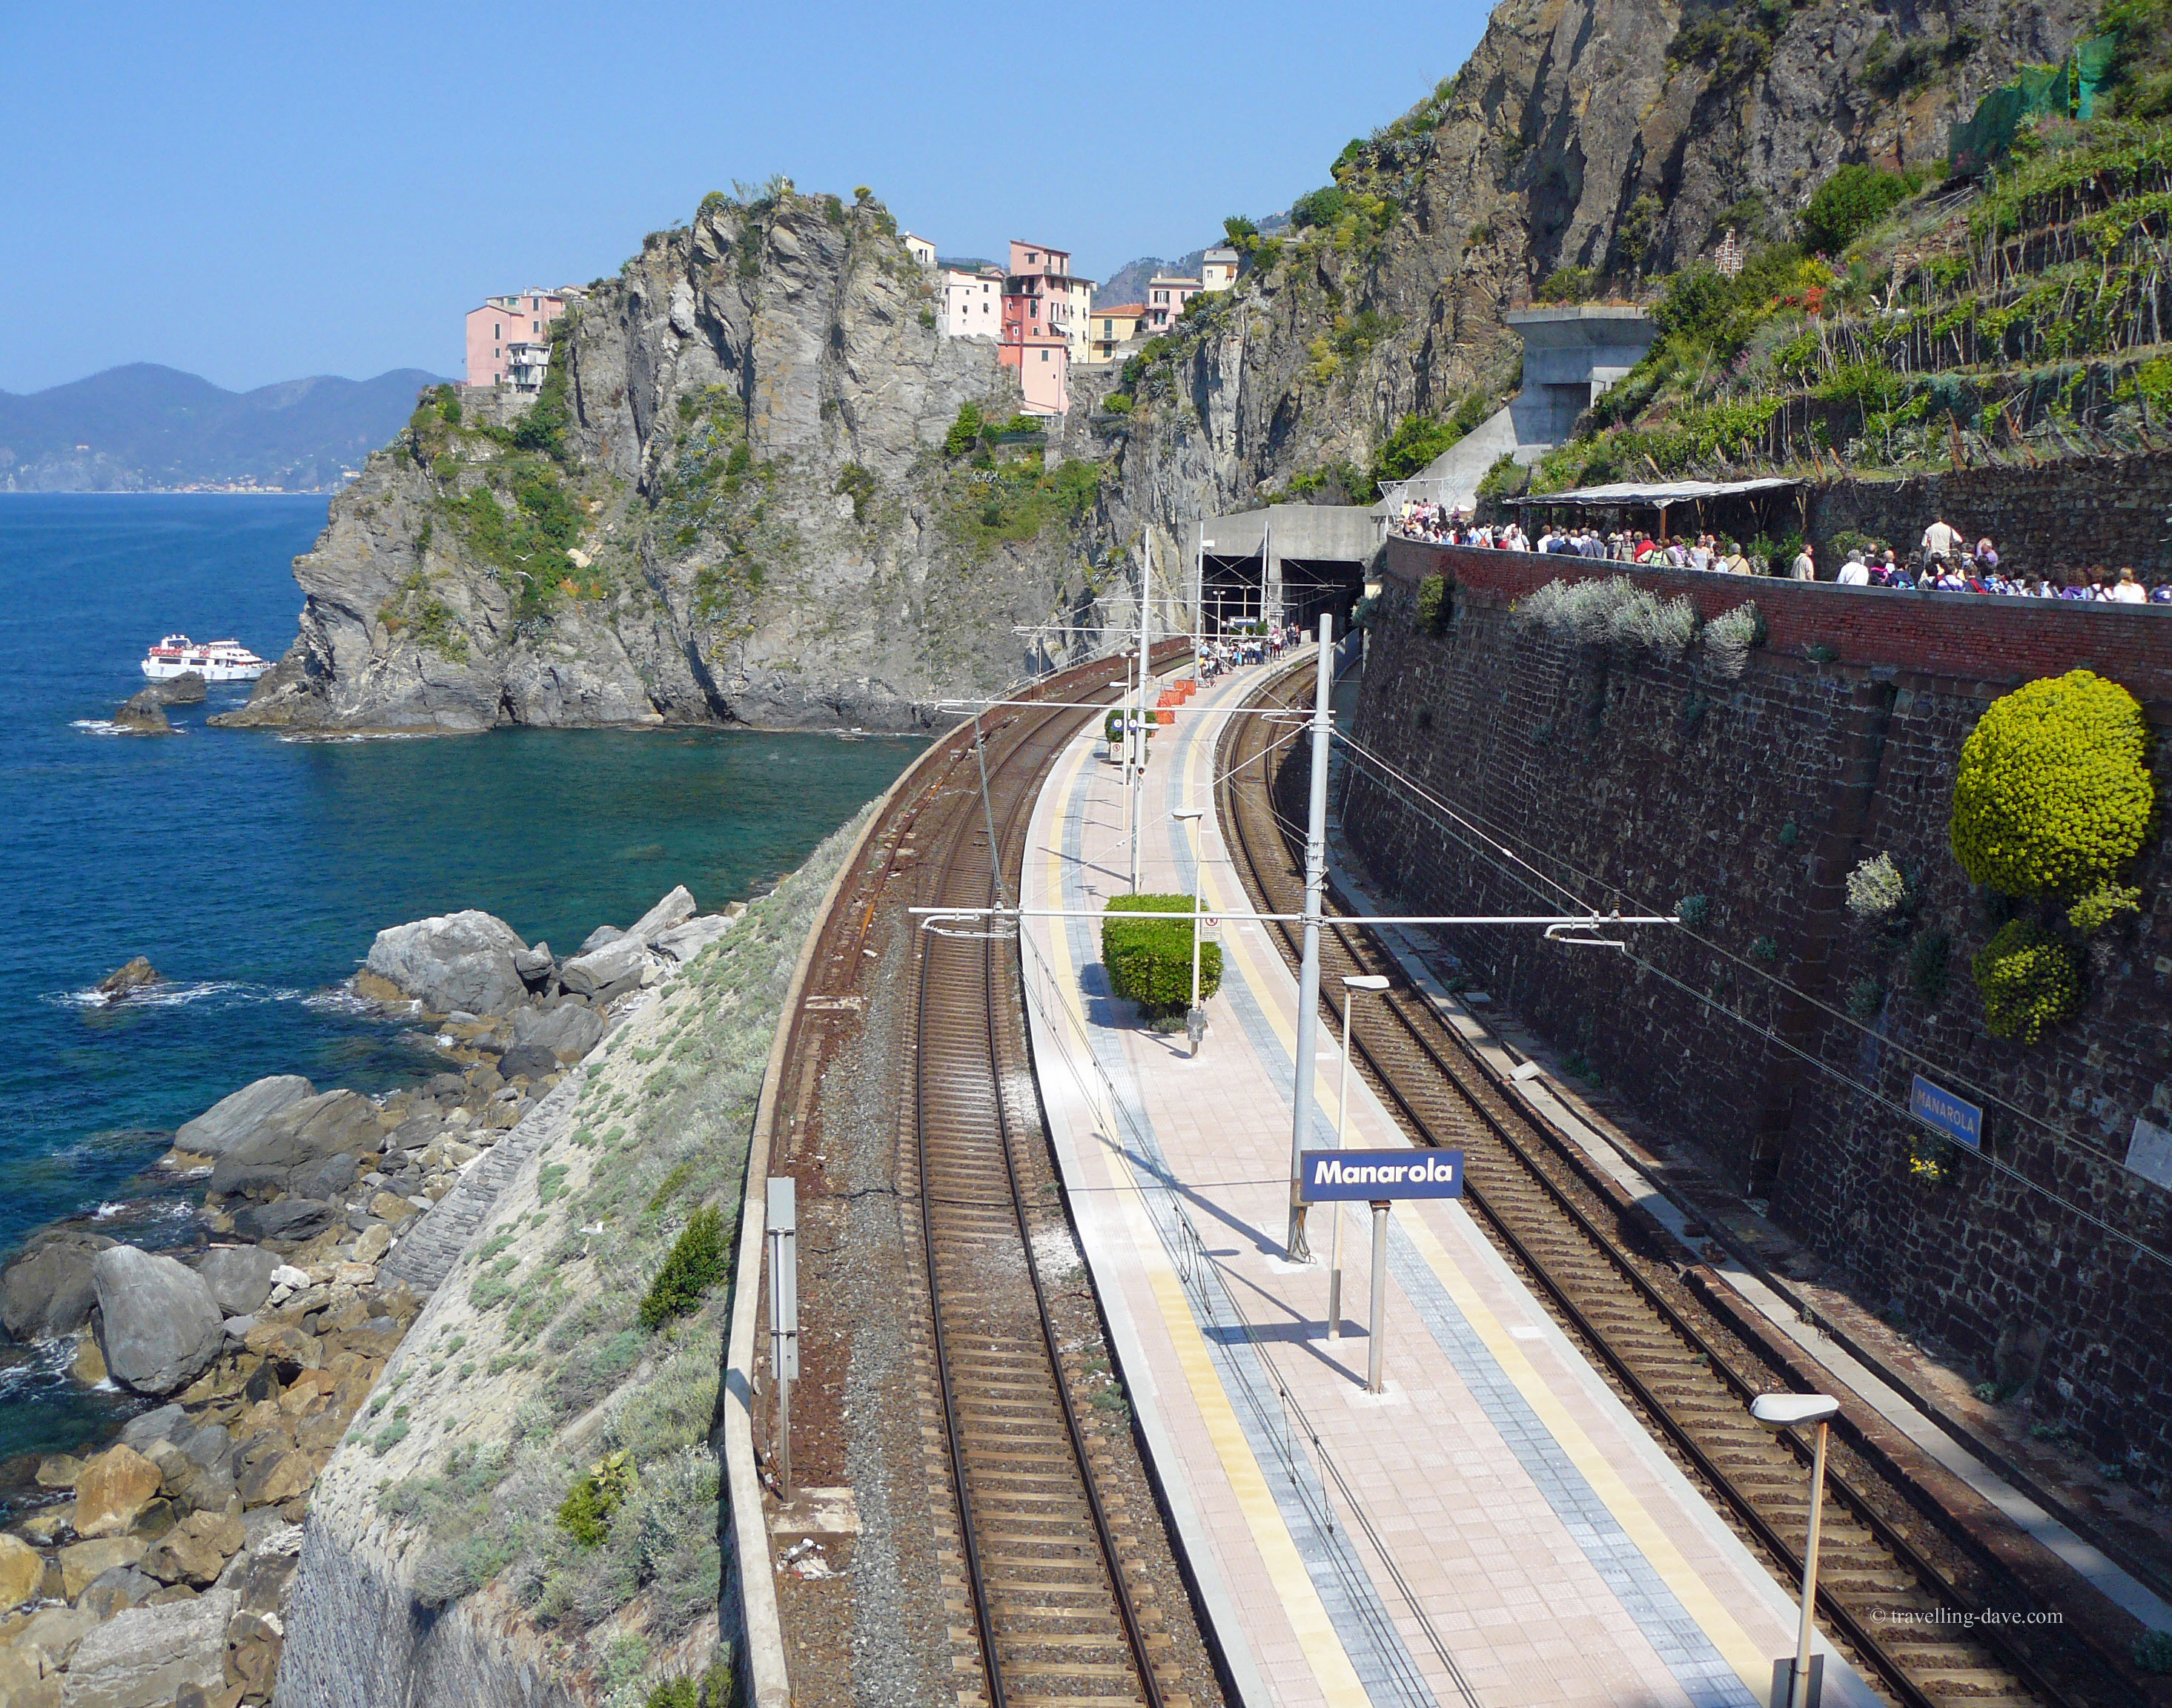 View of the train station at Manarola in Italy